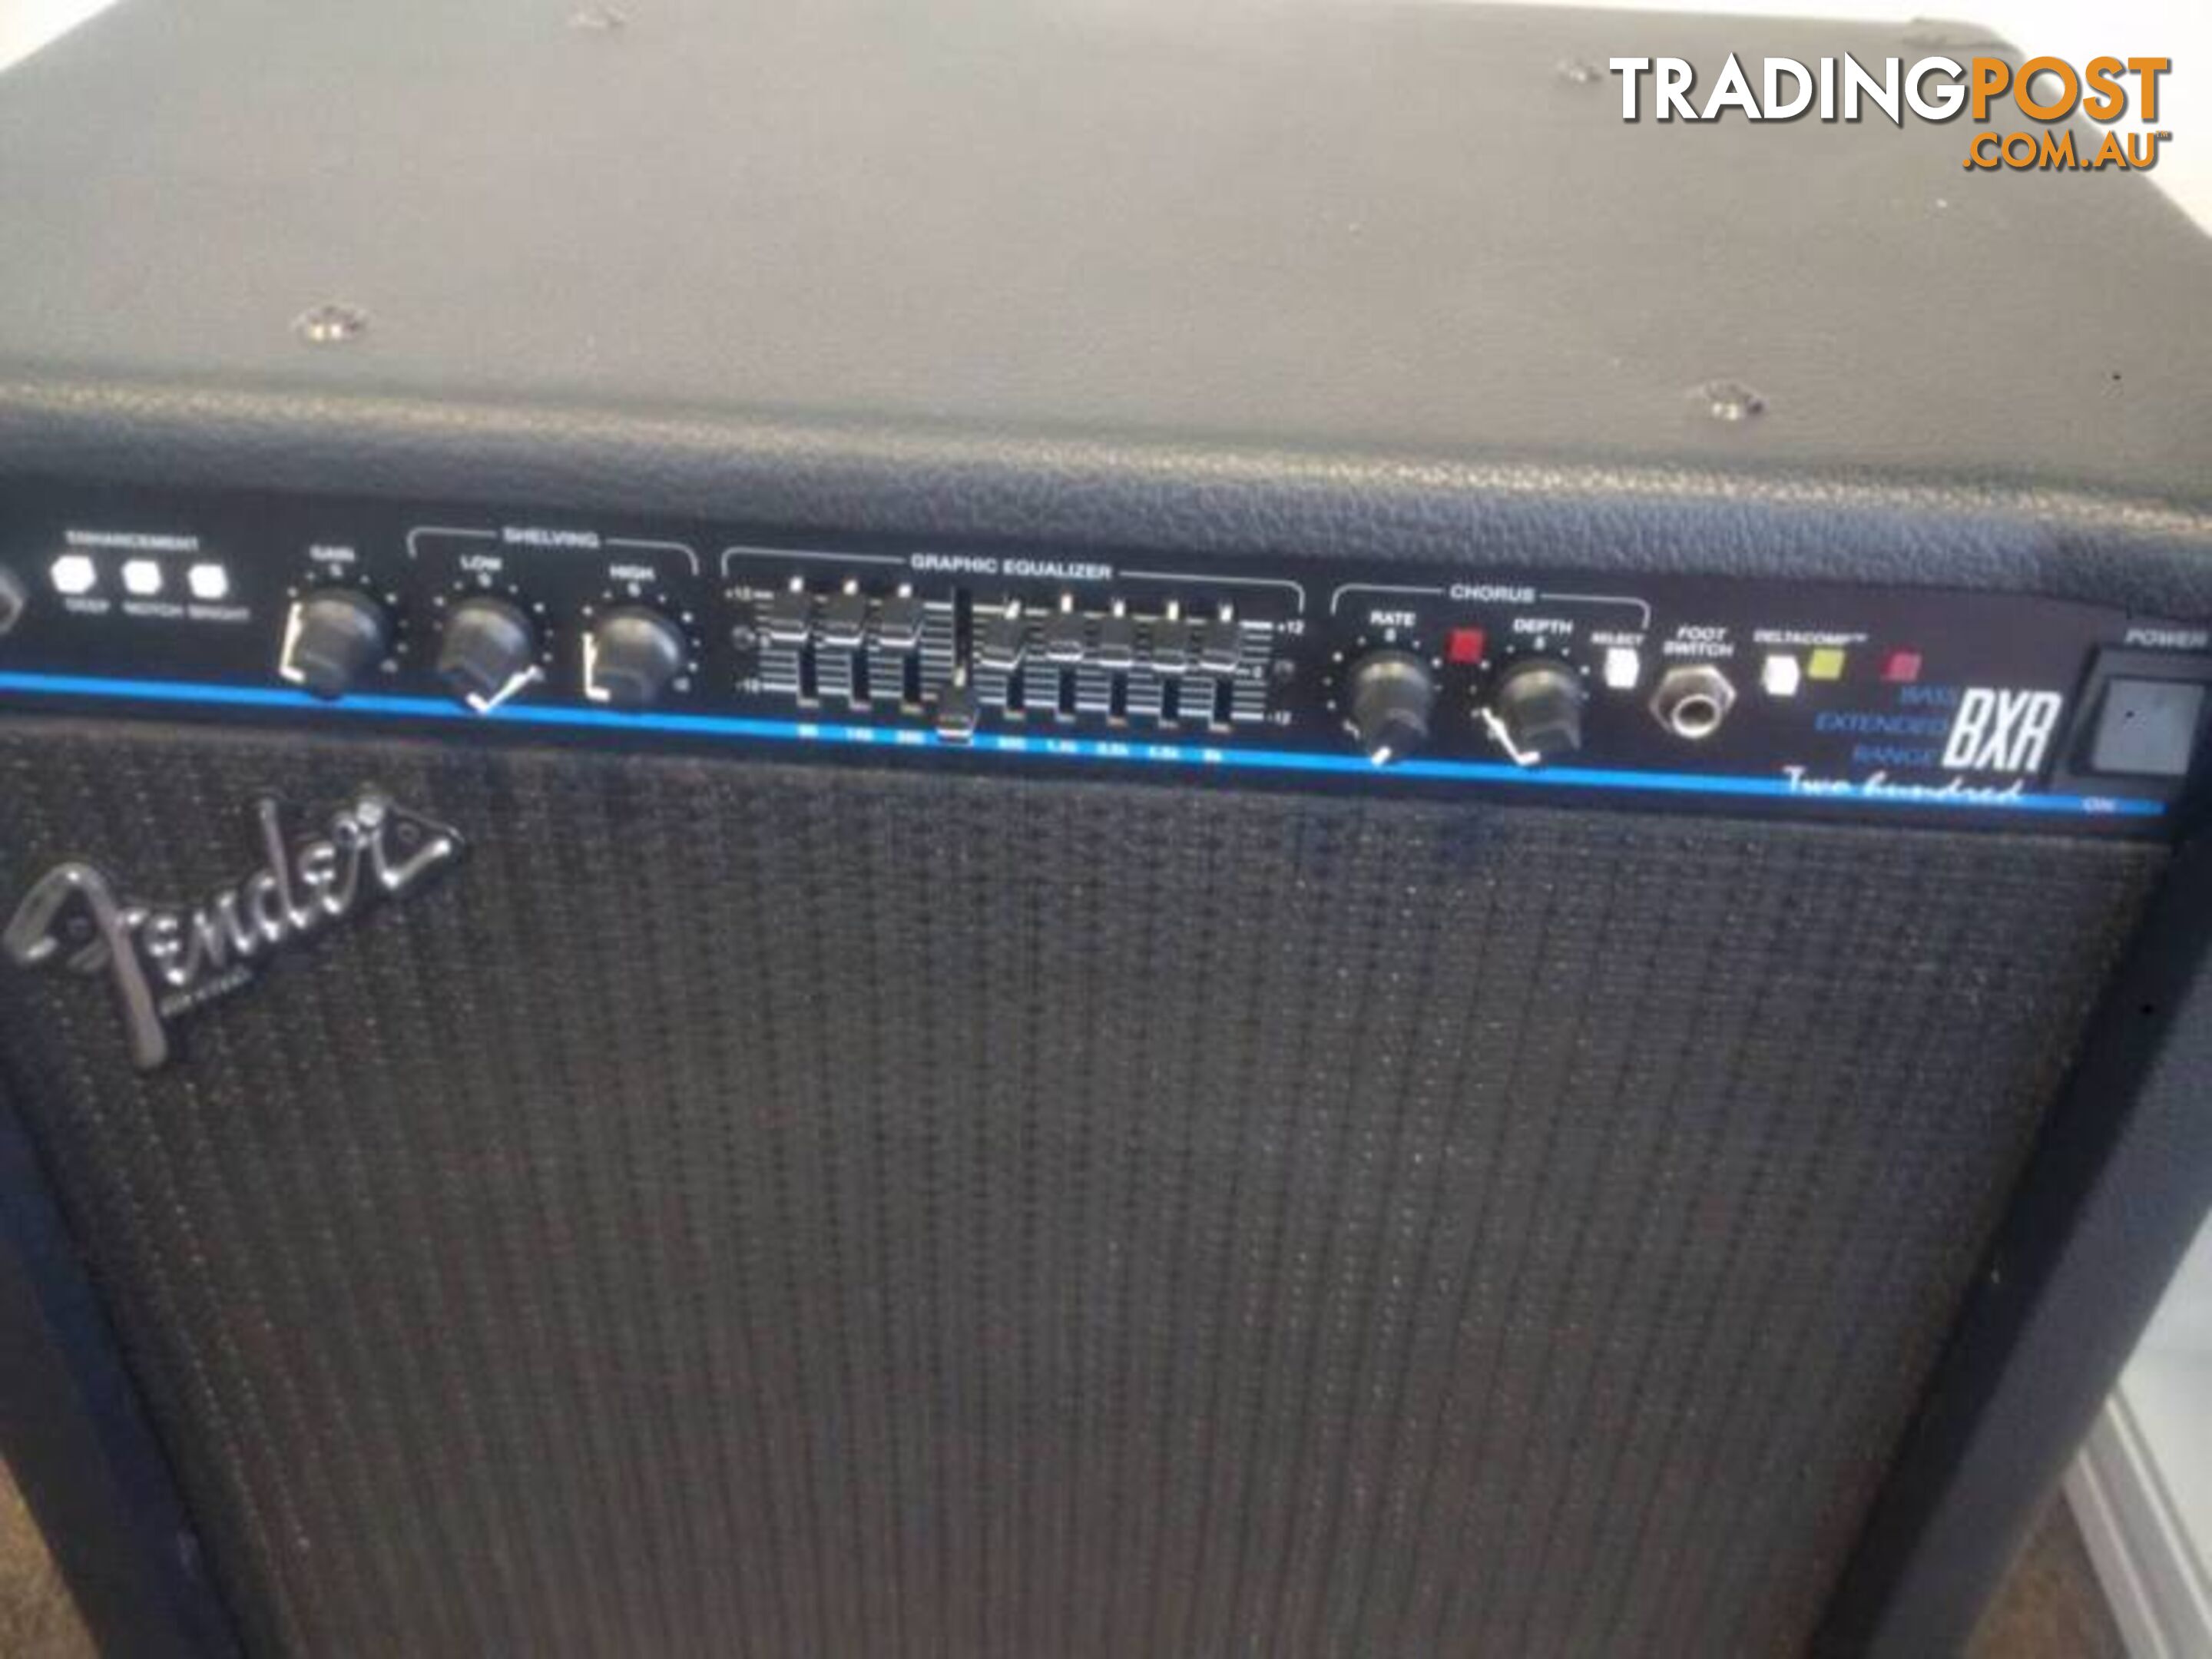 Wanted: SWAP or Trade Fender AMPLIFIER for BASS GUITAR